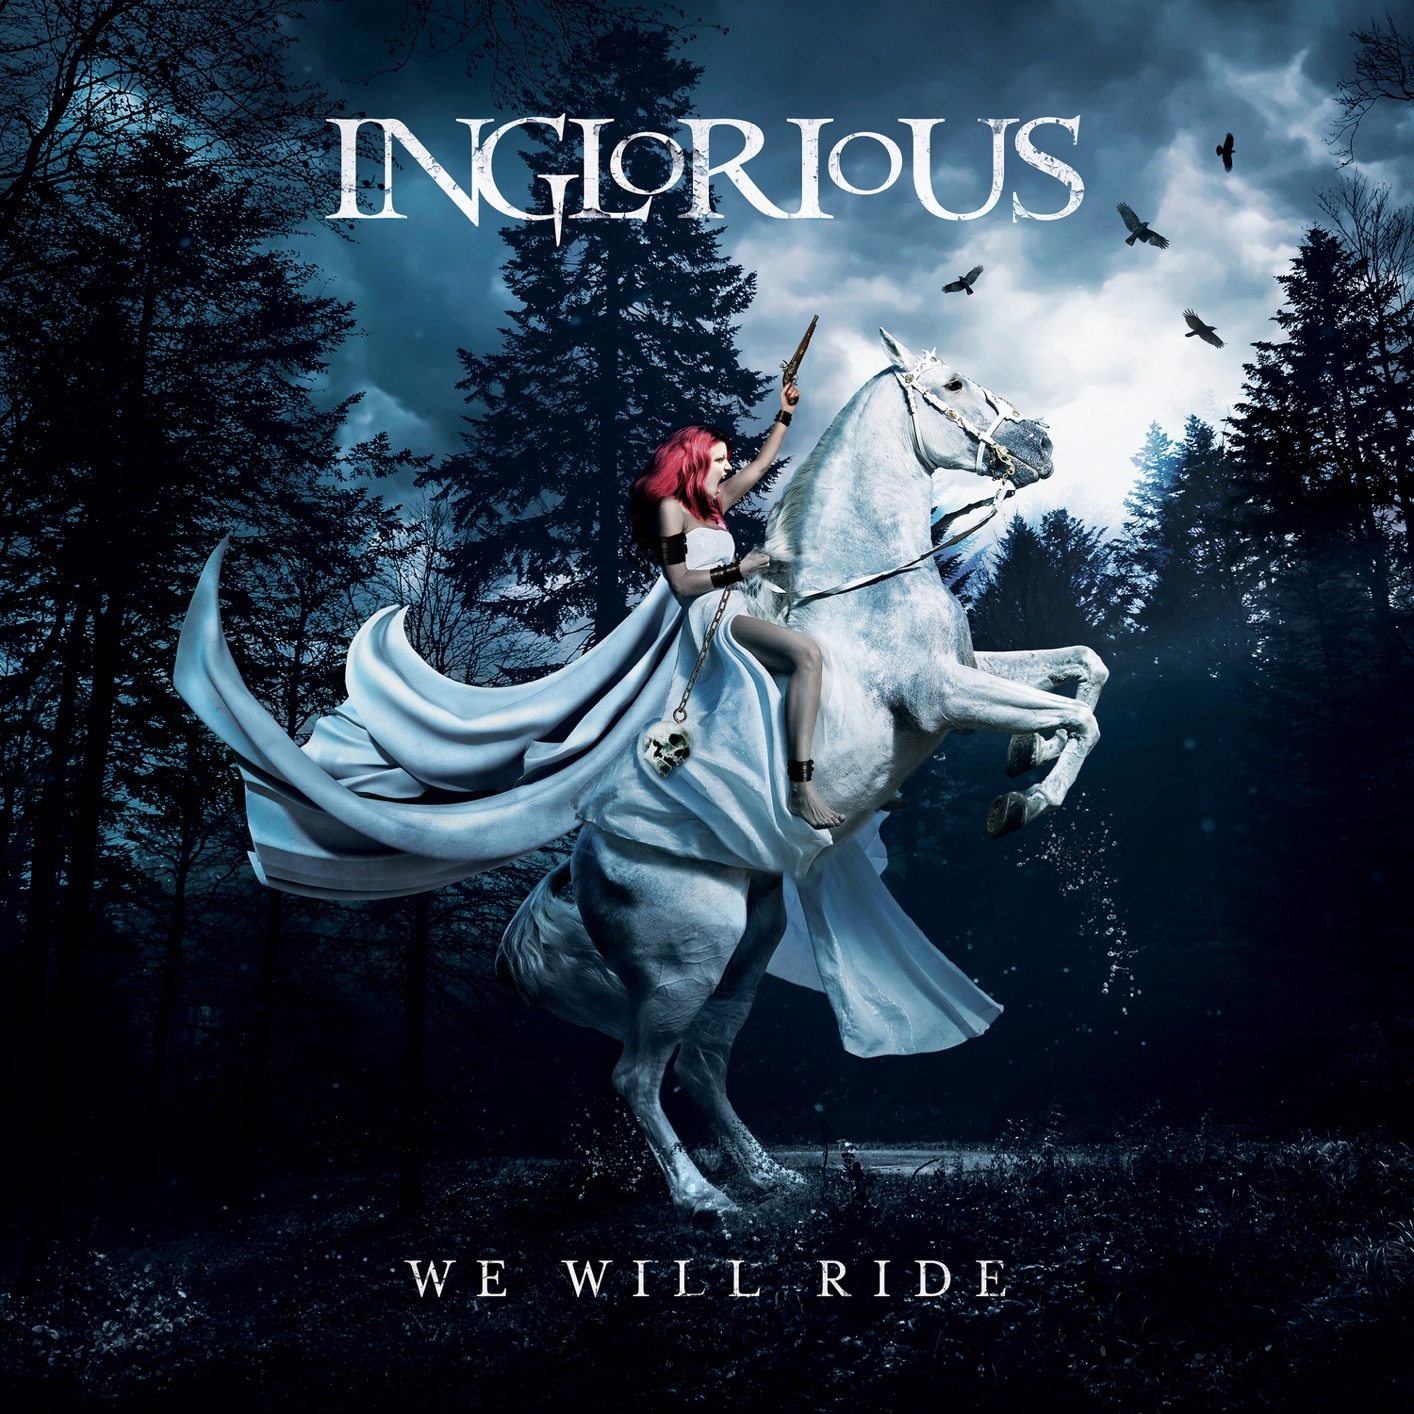 Inglorious – We Will Ride (2021) [FLAC 24bit/44,1kHz]